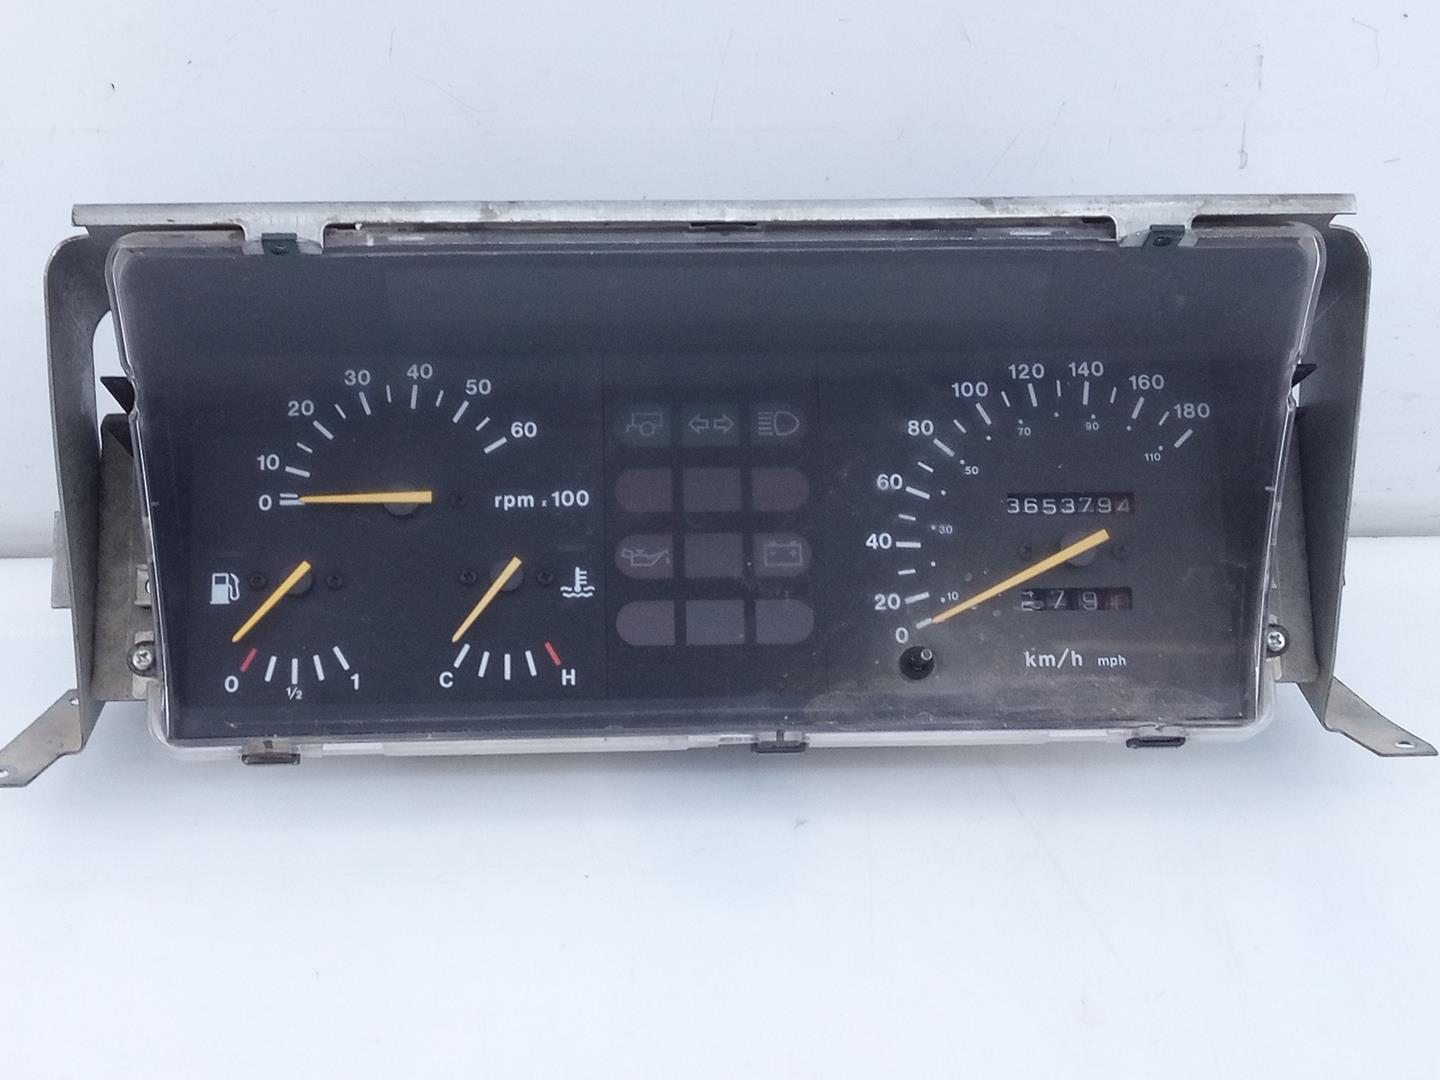 LAND ROVER Discovery 2 generation (1998-2004) Speedometer LR0003002, 211290, E3-B3-18-2 23300309